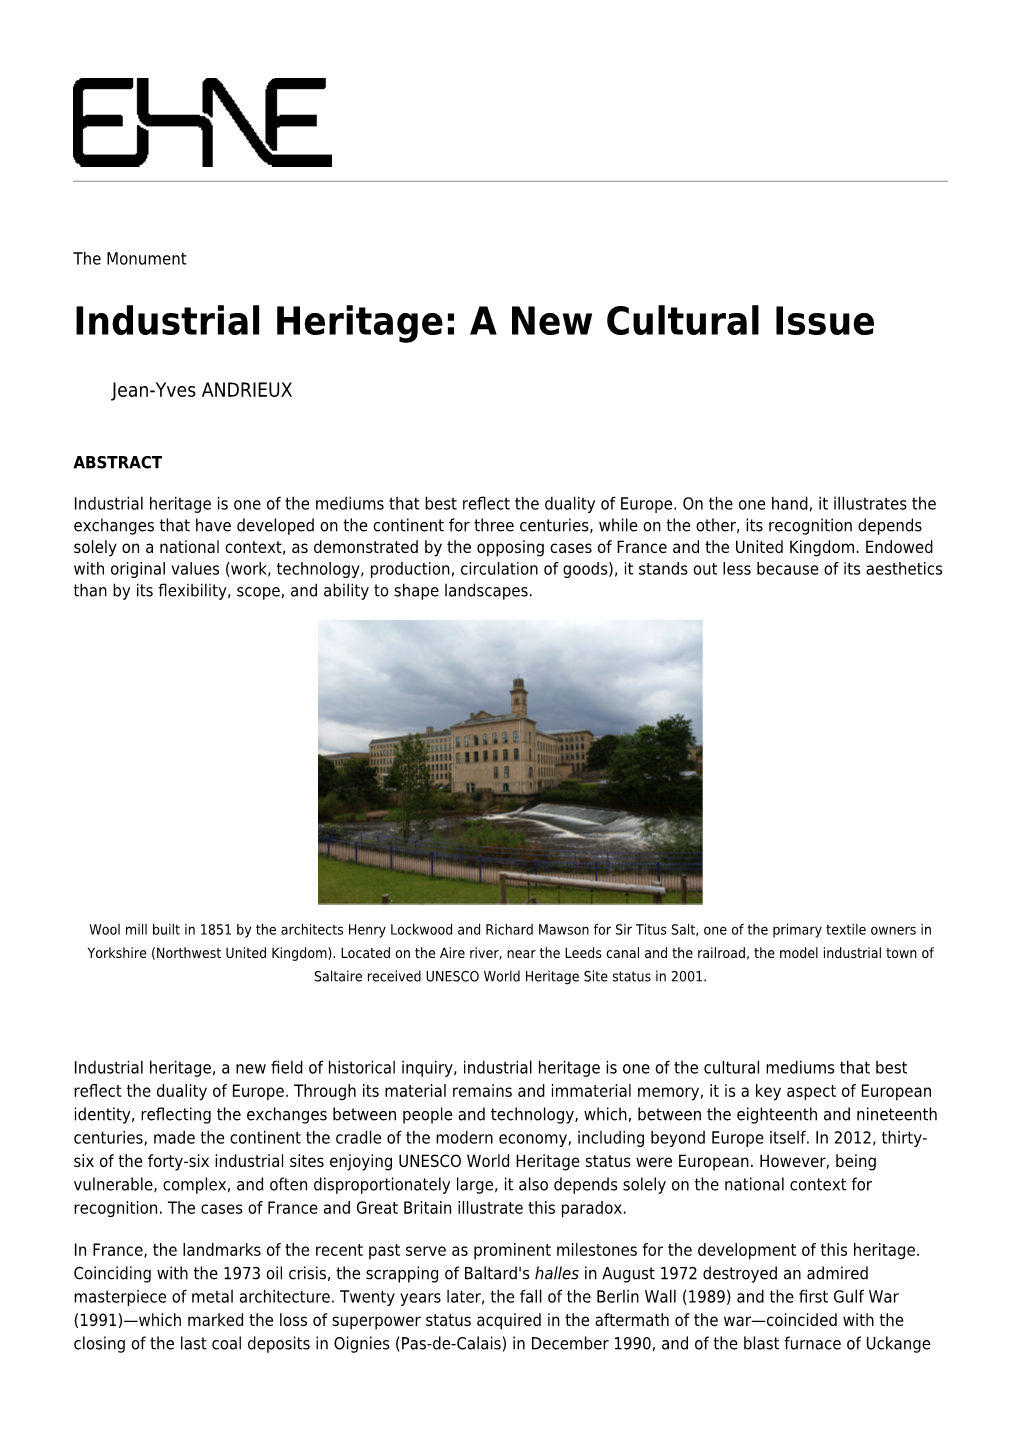 Industrial Heritage: a New Cultural Issue